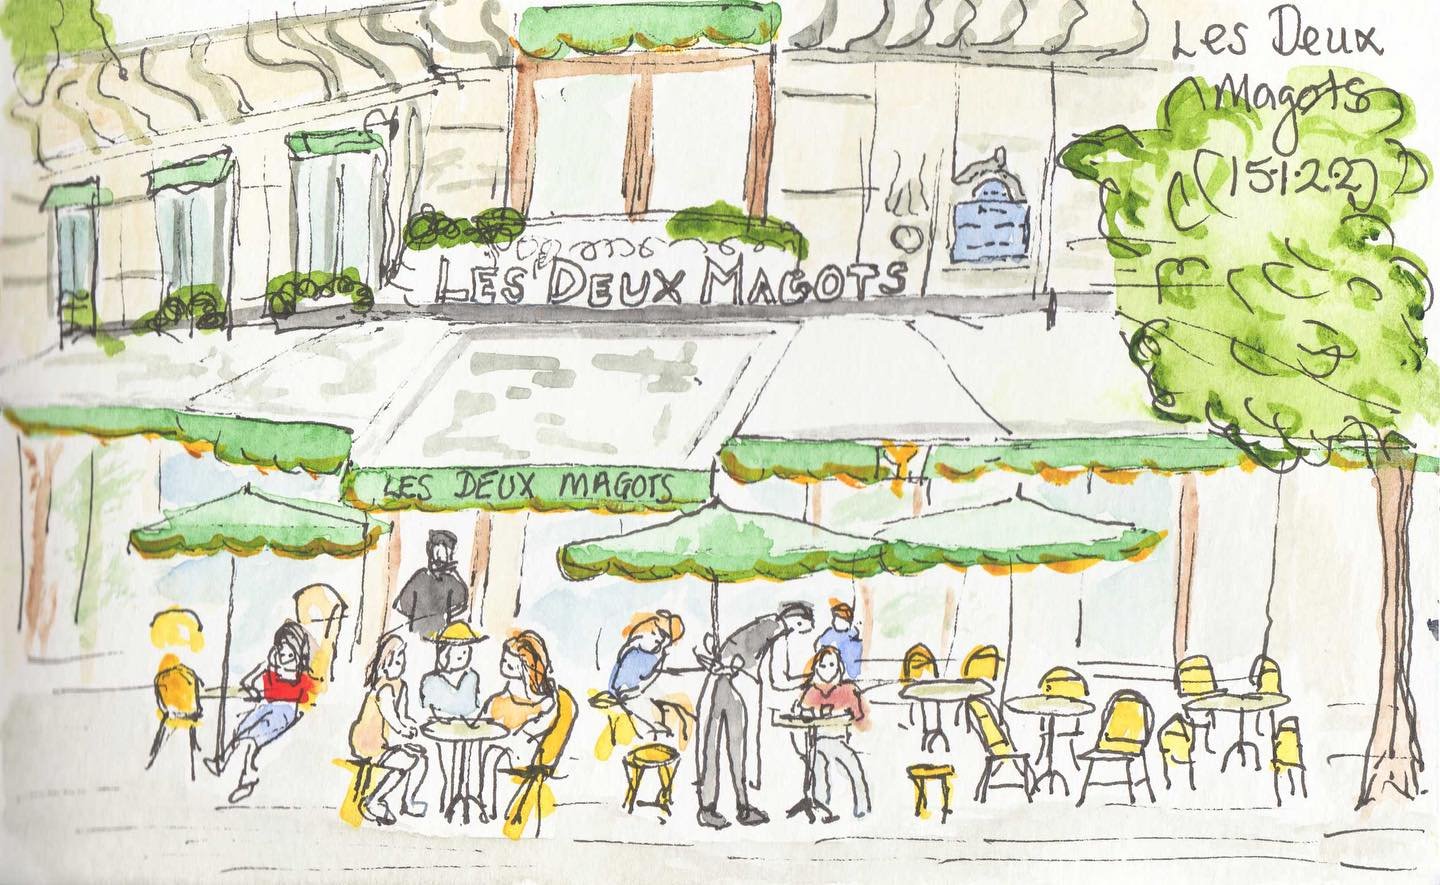 In the 6th arrondissement of Paris, you&rsquo;ll find the famous caf&eacute;, Les deux Magots. Estabiished in 1884, on the site of a previous silk and novelty shop, it became the regular place for artists and writers to meet and share their ideas. Wa